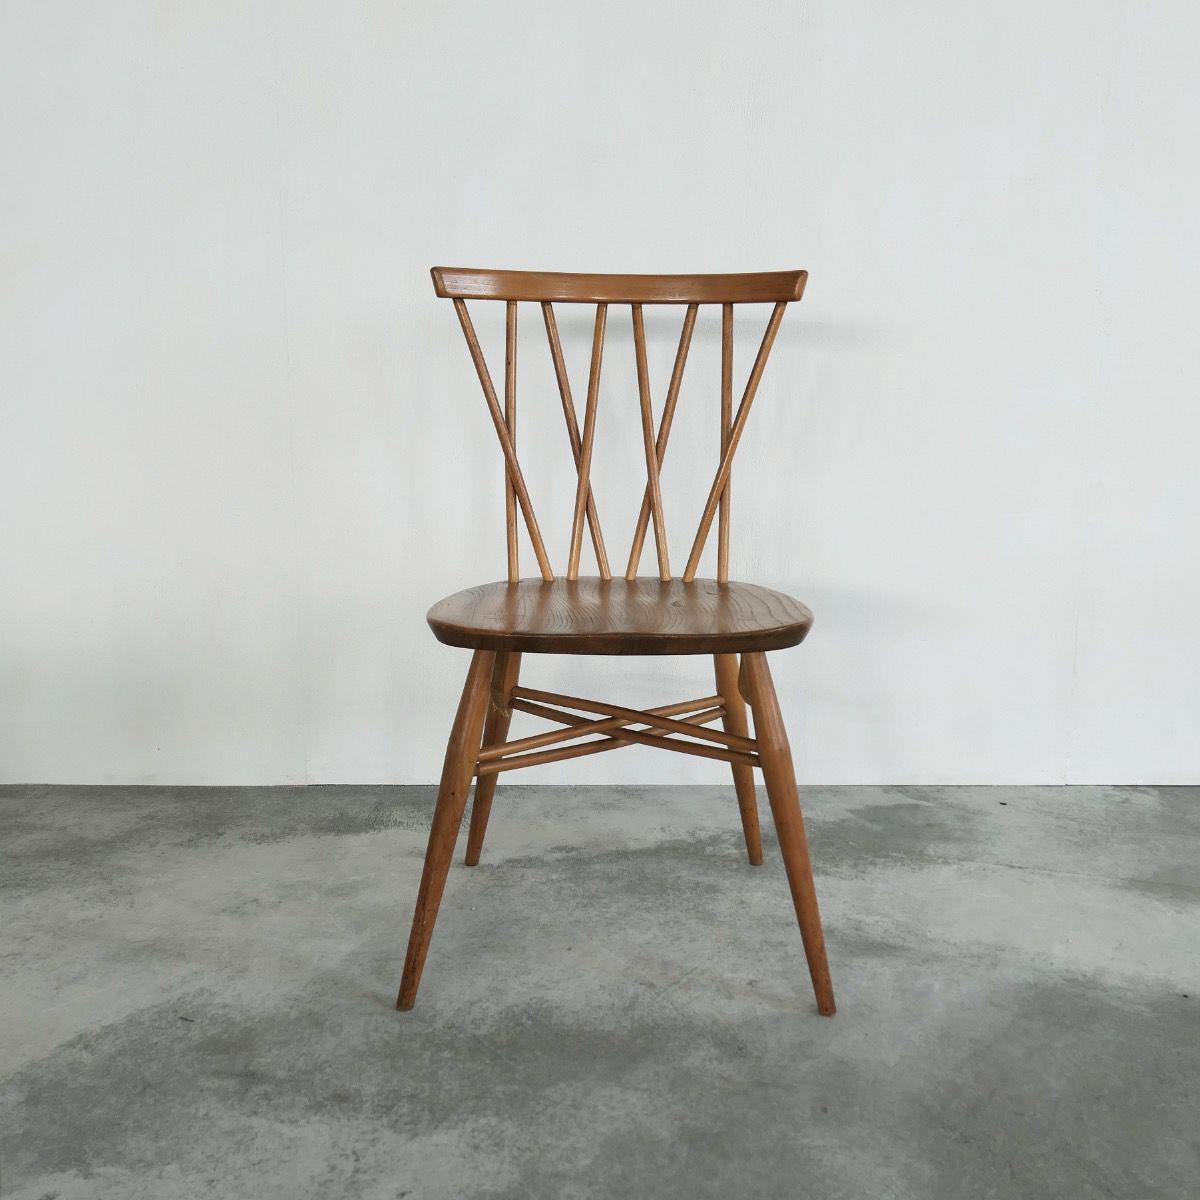 Lucian Ercolani for Ercol Cross spindle back chair in beech and elm.

Lovely spindle back chair by Ercol, designed by the founder of the company Lucian Ercolani. Great simple but graphical design, due to the playfully crossed spindles in the